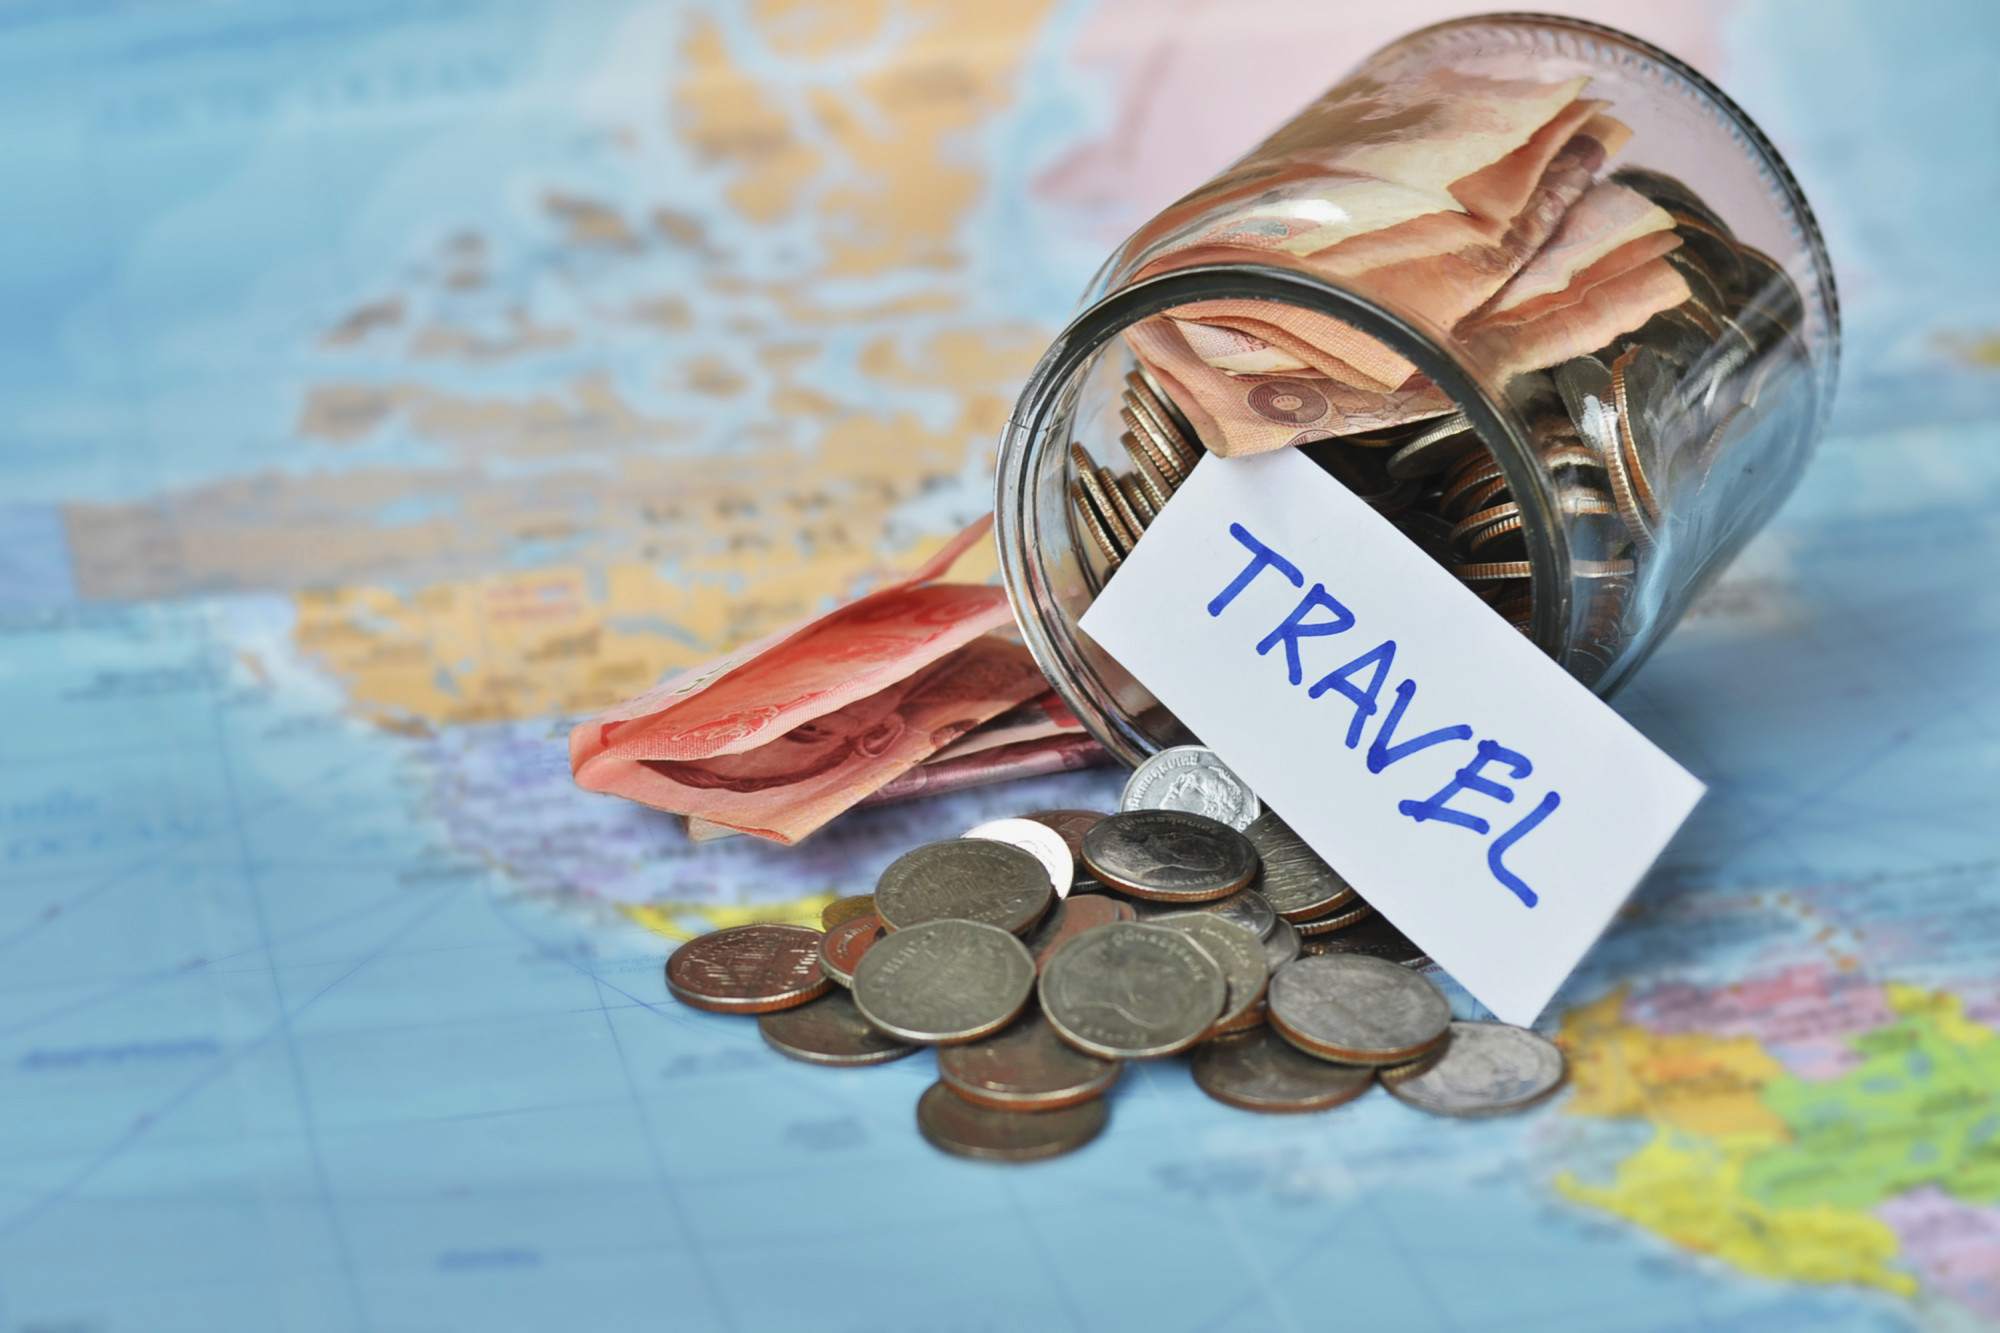 travel sign and money on map